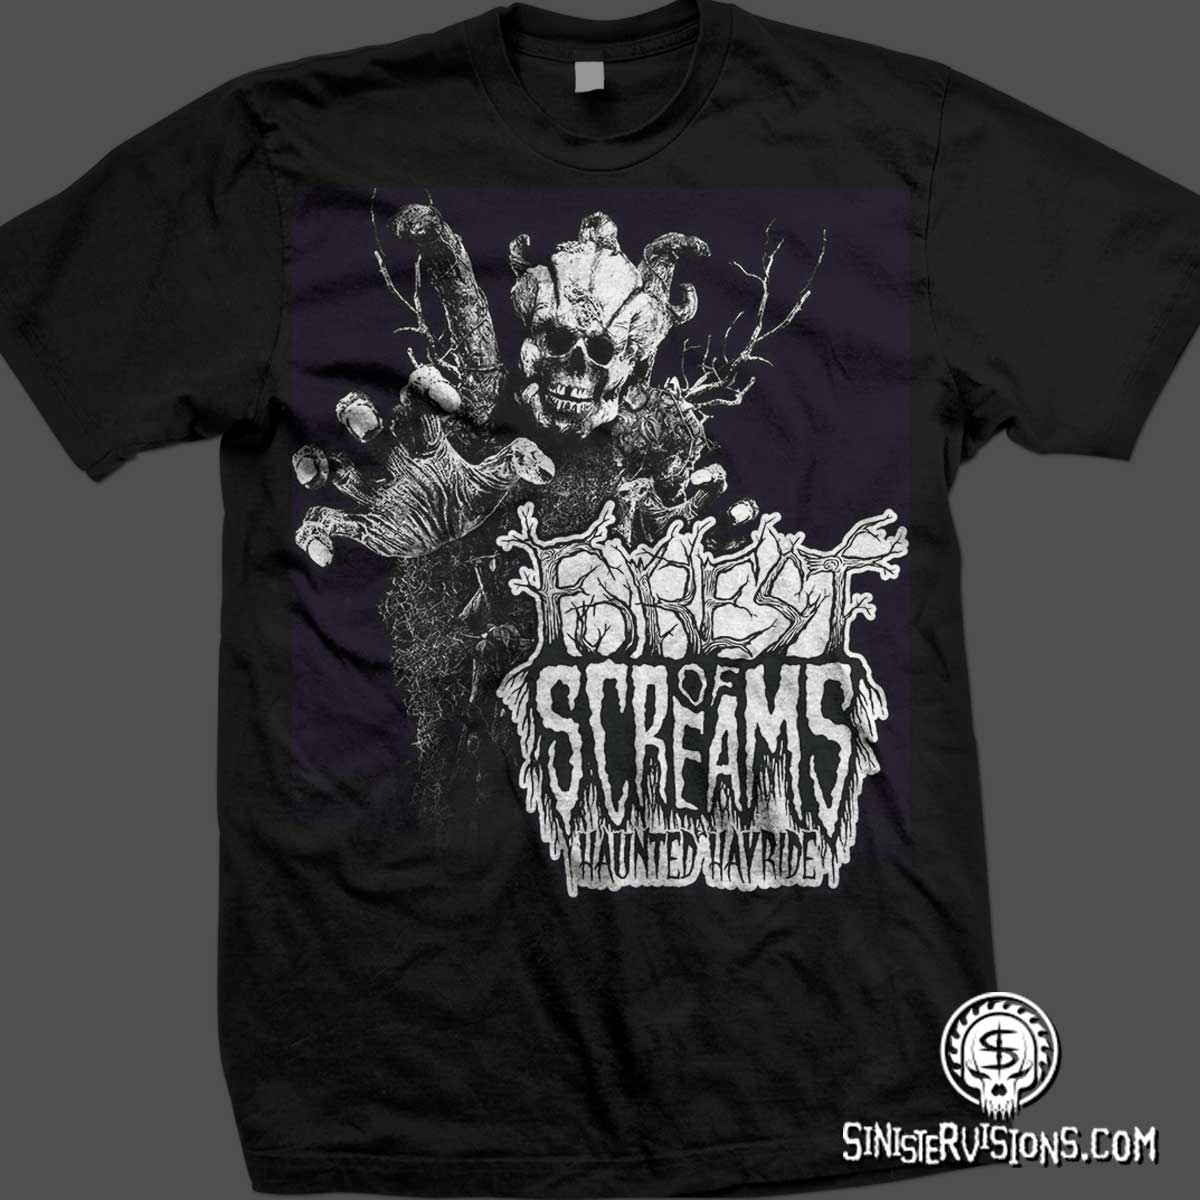 Sinister Visions: T-shirt design for haunted houses, haunted ...